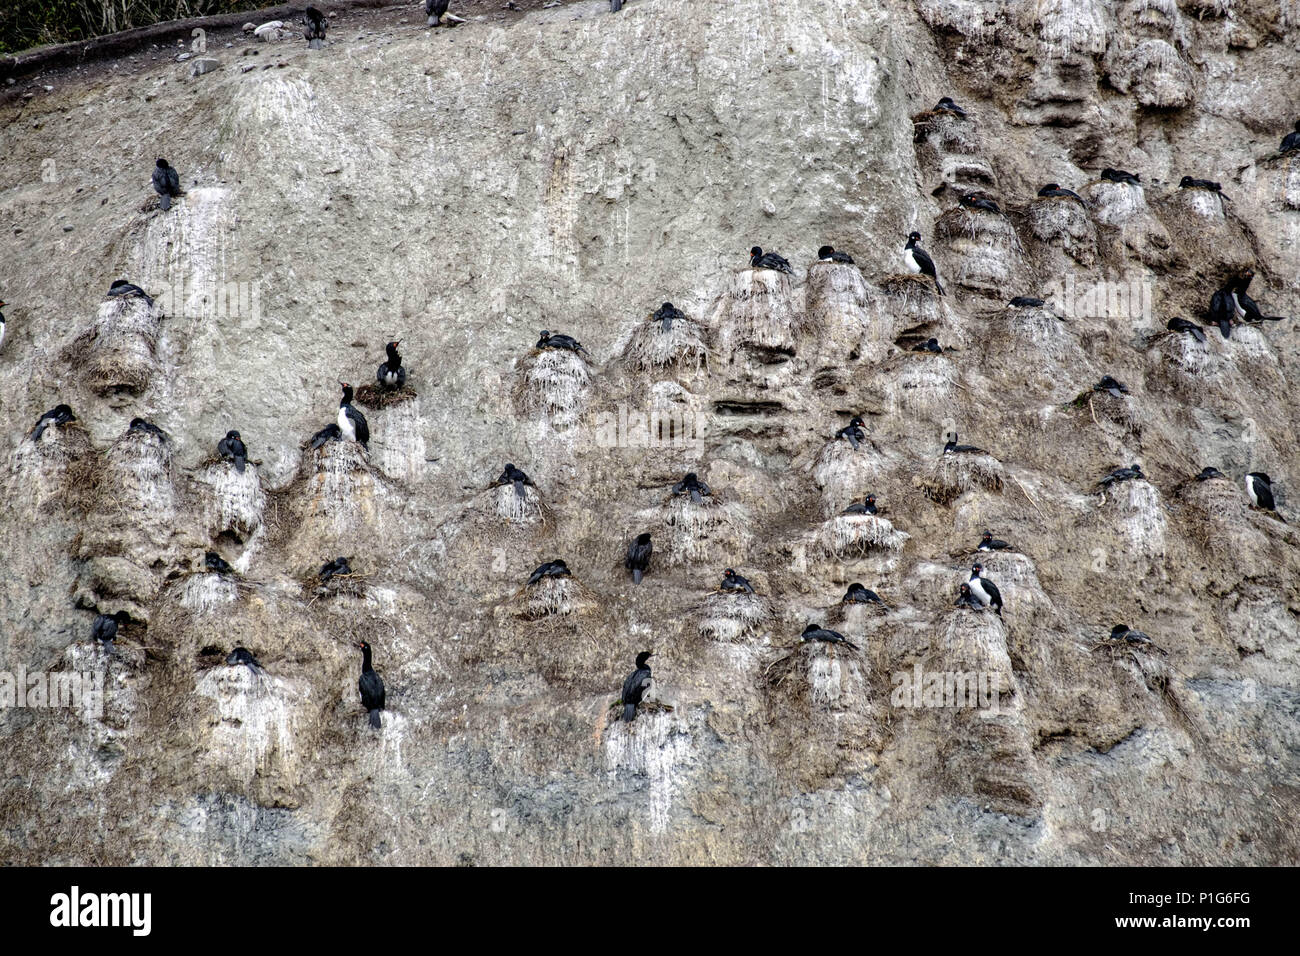 Many rock shags on their nests on a steep cliff at the coast of an island in the Beagle Channel. Stock Photo